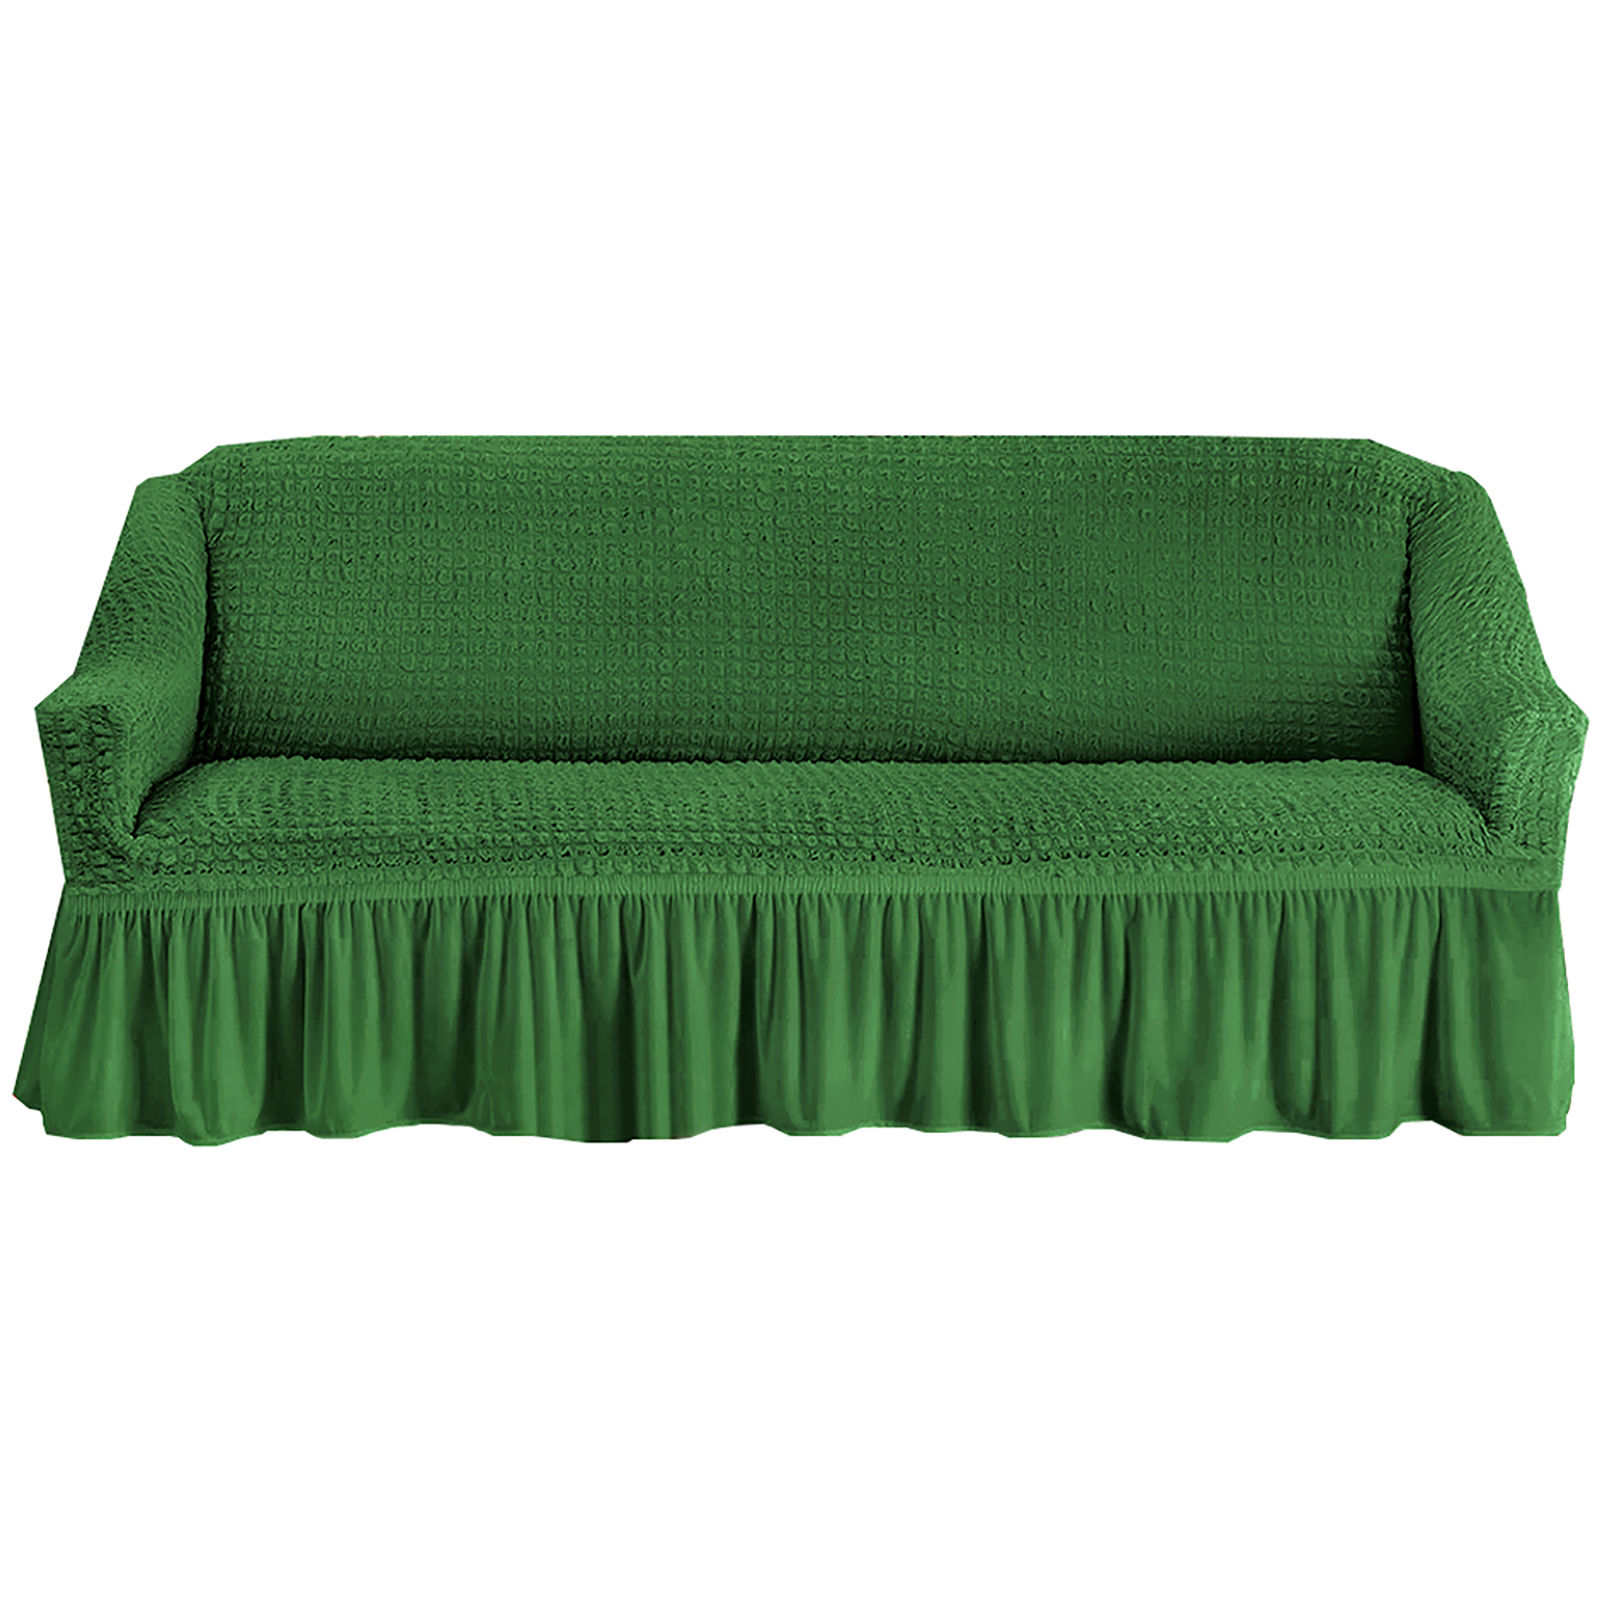 Stretch Sofa Slipcover, 3 Seater Sofa Slipcovers With Skirt With Armless Soft Sofa Cover Elastic Straps Sofa Slipcover For Living Room Kids Pets-Green A-Large